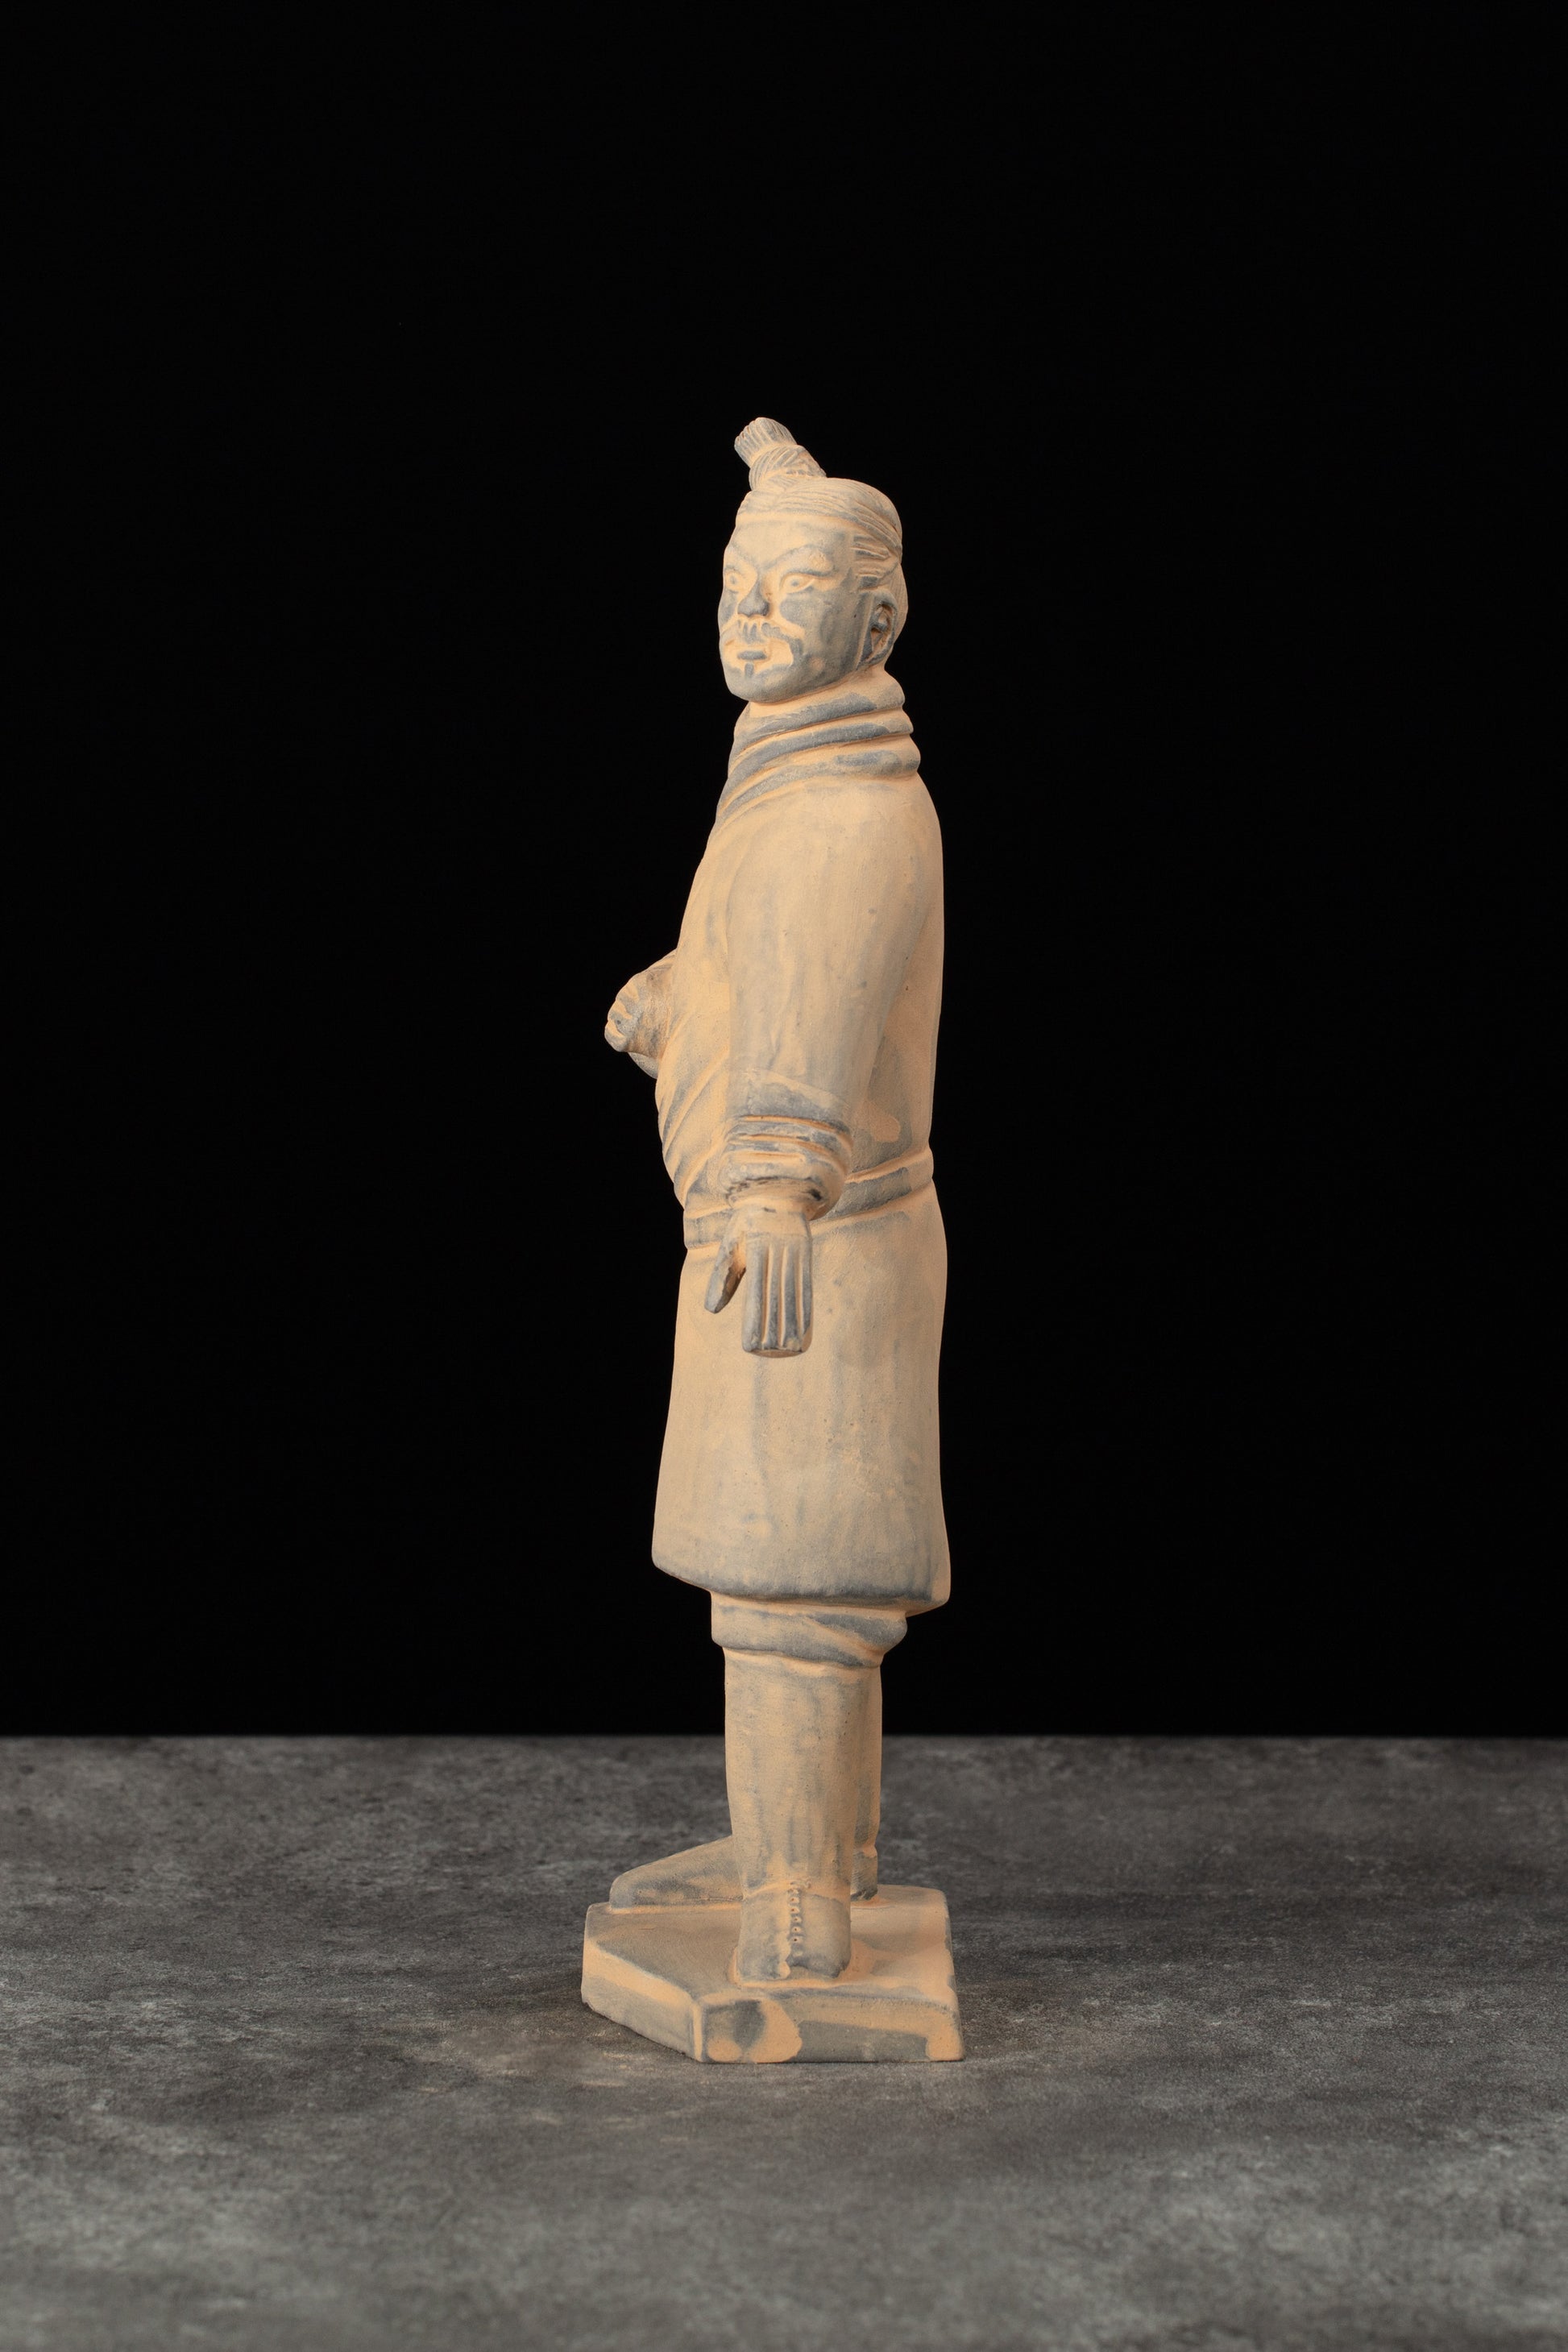 25CM Standing Archer - CLAYARMY-Unique perspective of the 25CM Terracotta Army Standing Archer, highlighting specific features and lifelike details.